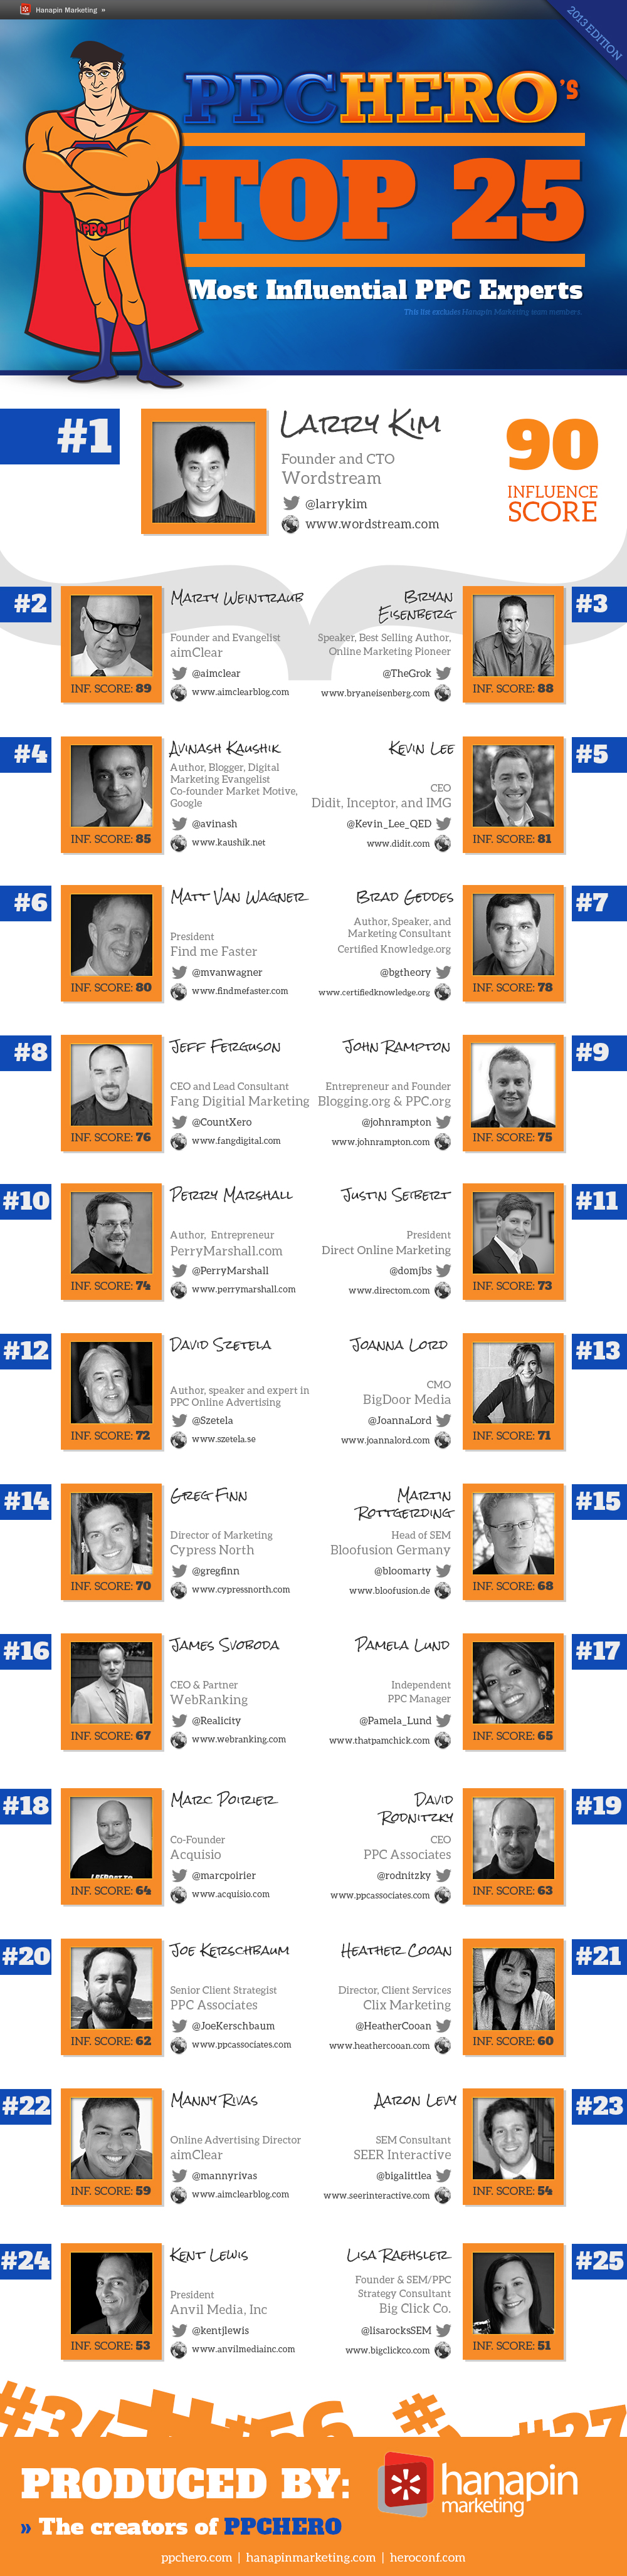 PPC-Hero-Top-25-Most-Influential-PPC-Experts-2013_new